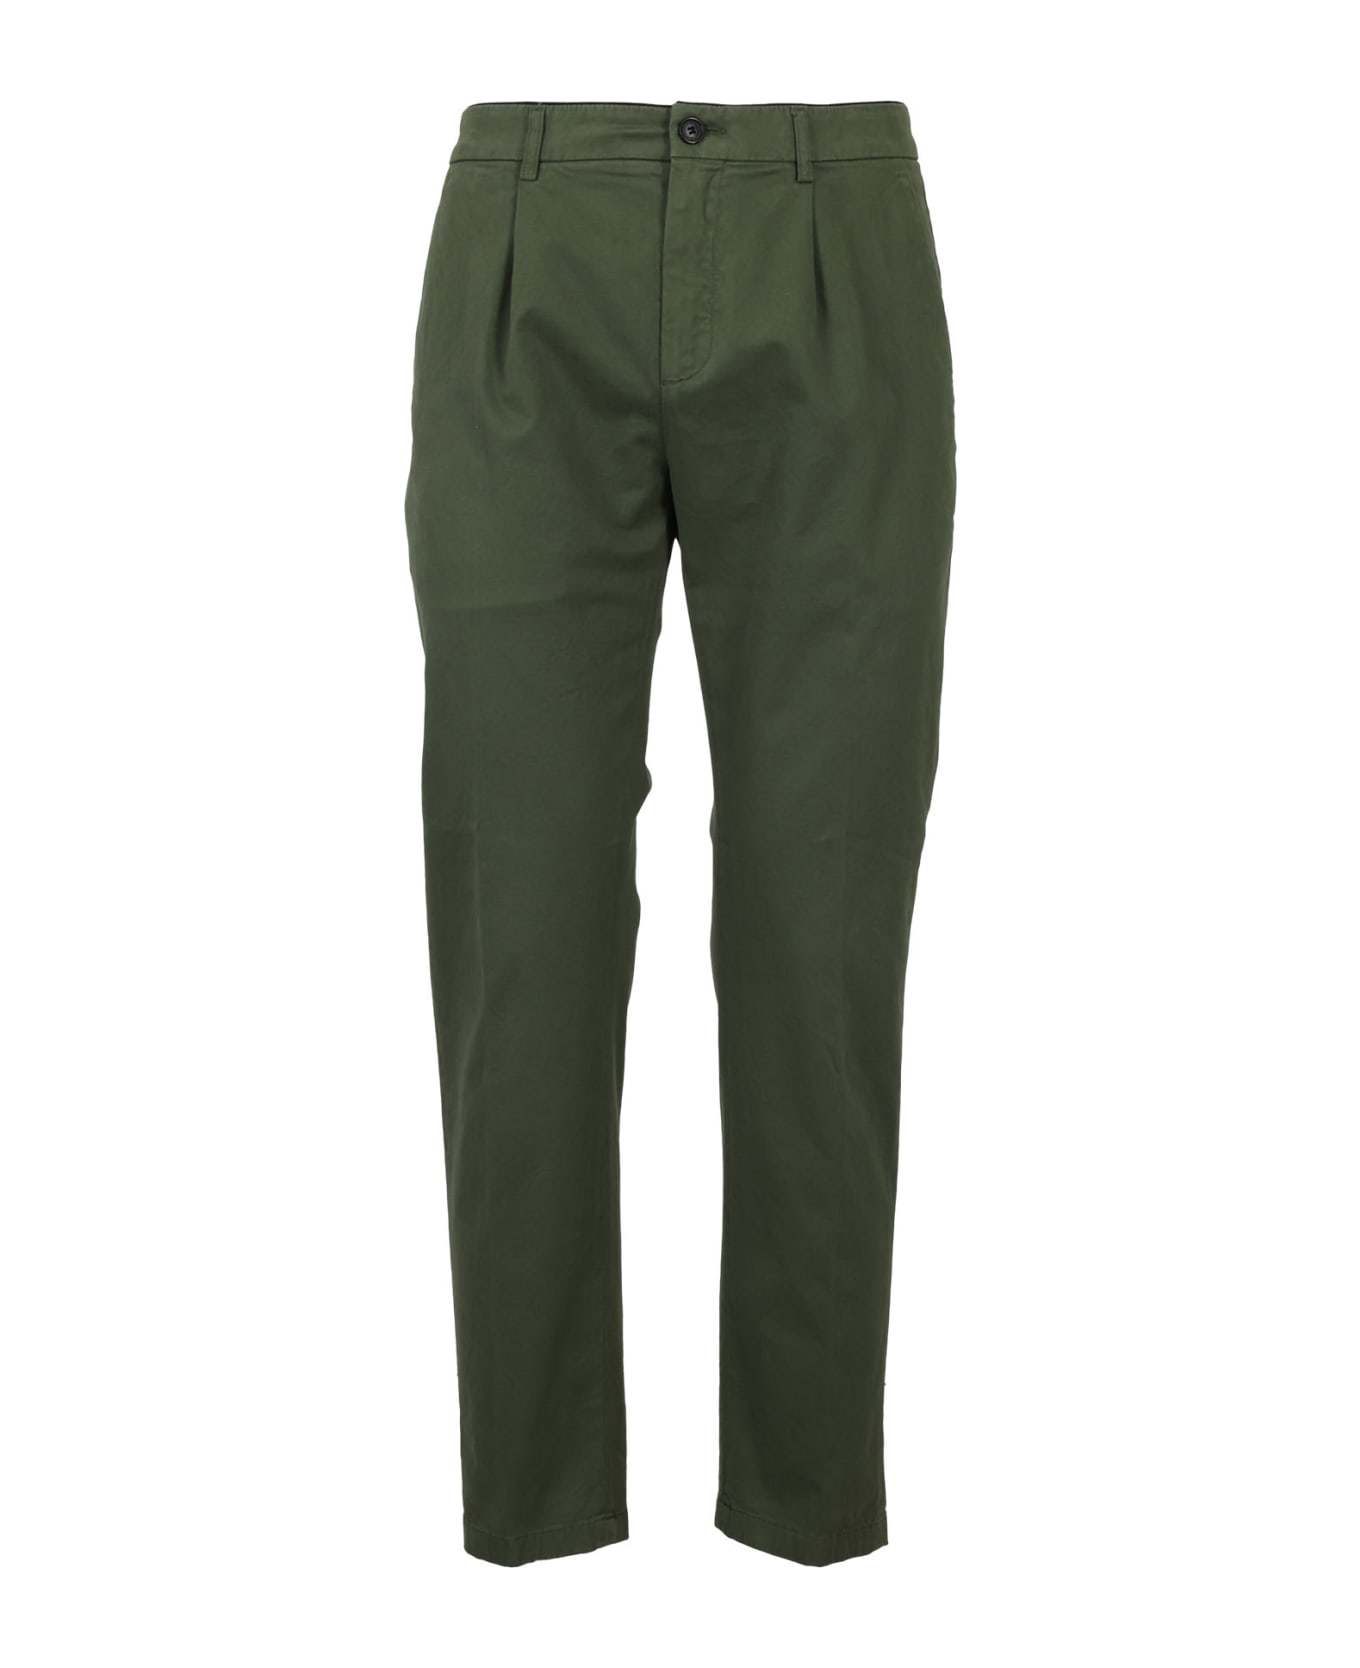 Department Five Prince Pences Chinos - Militare ボトムス